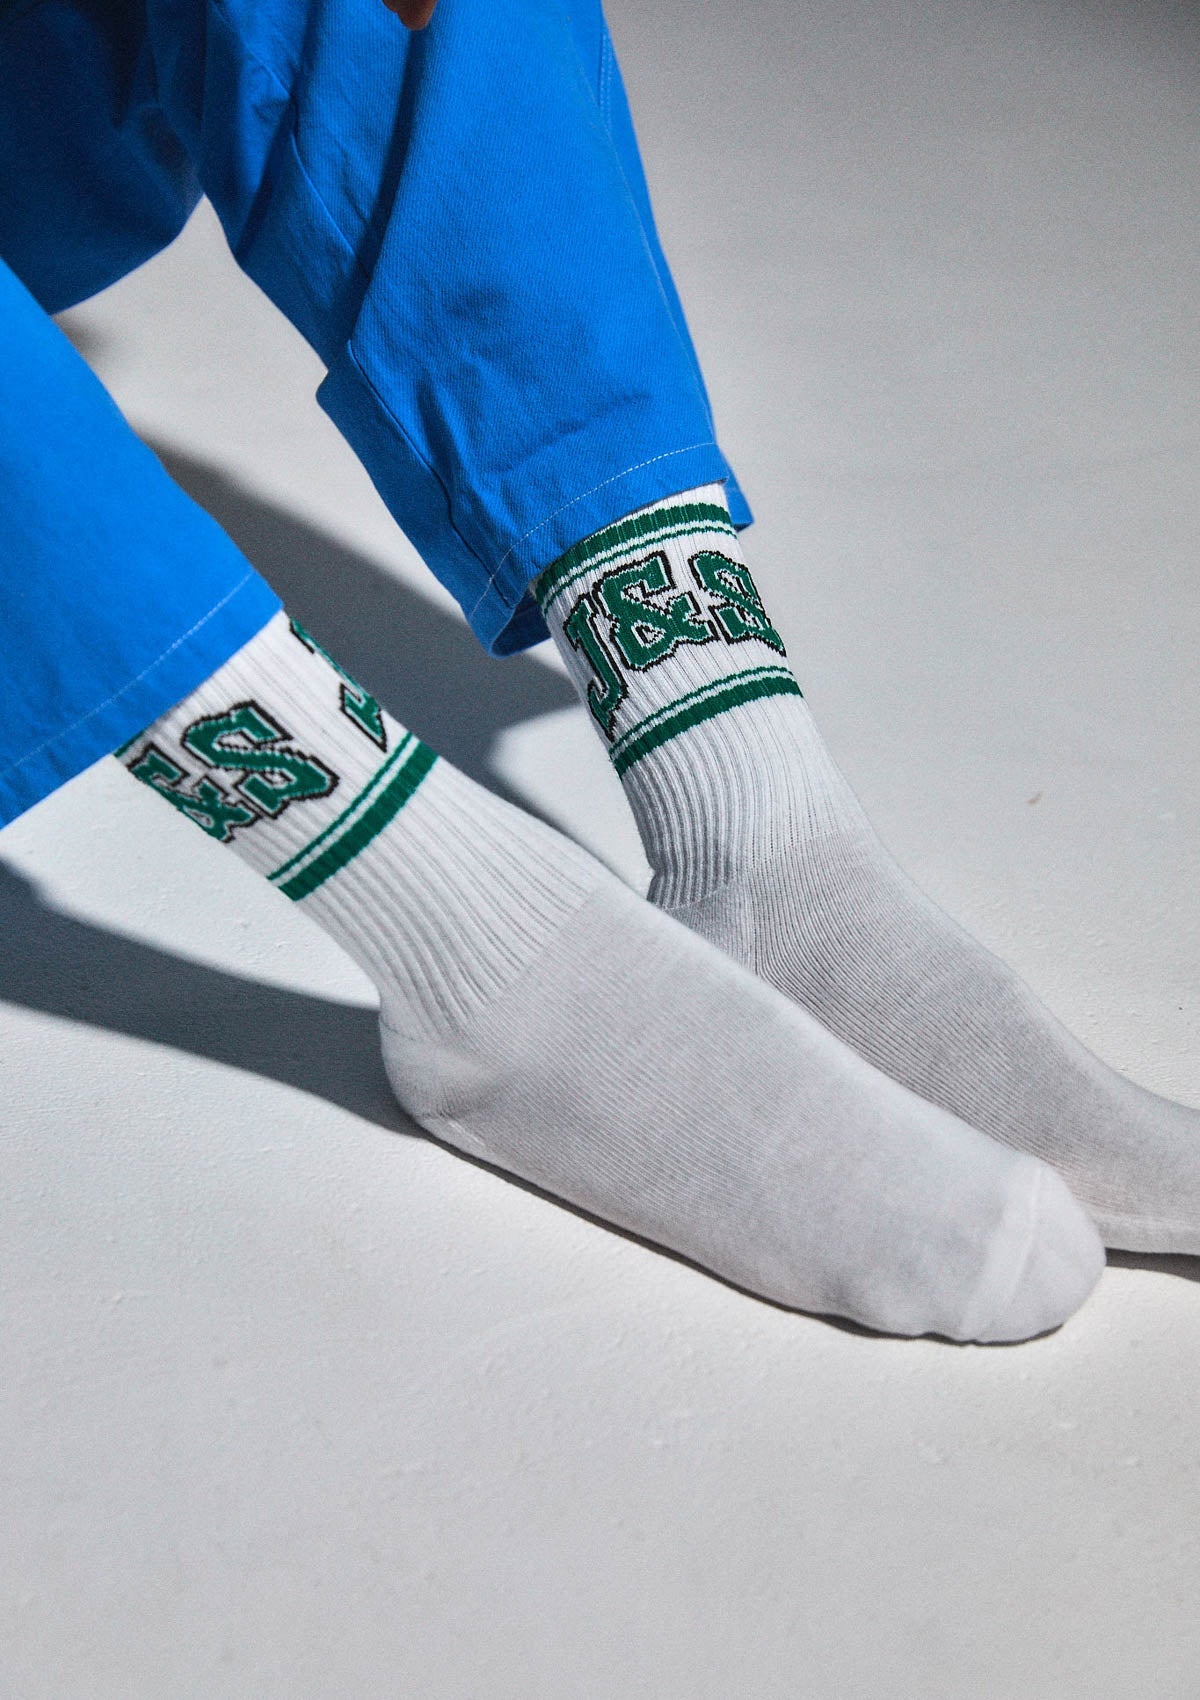 The Double Play Socks - White/Green